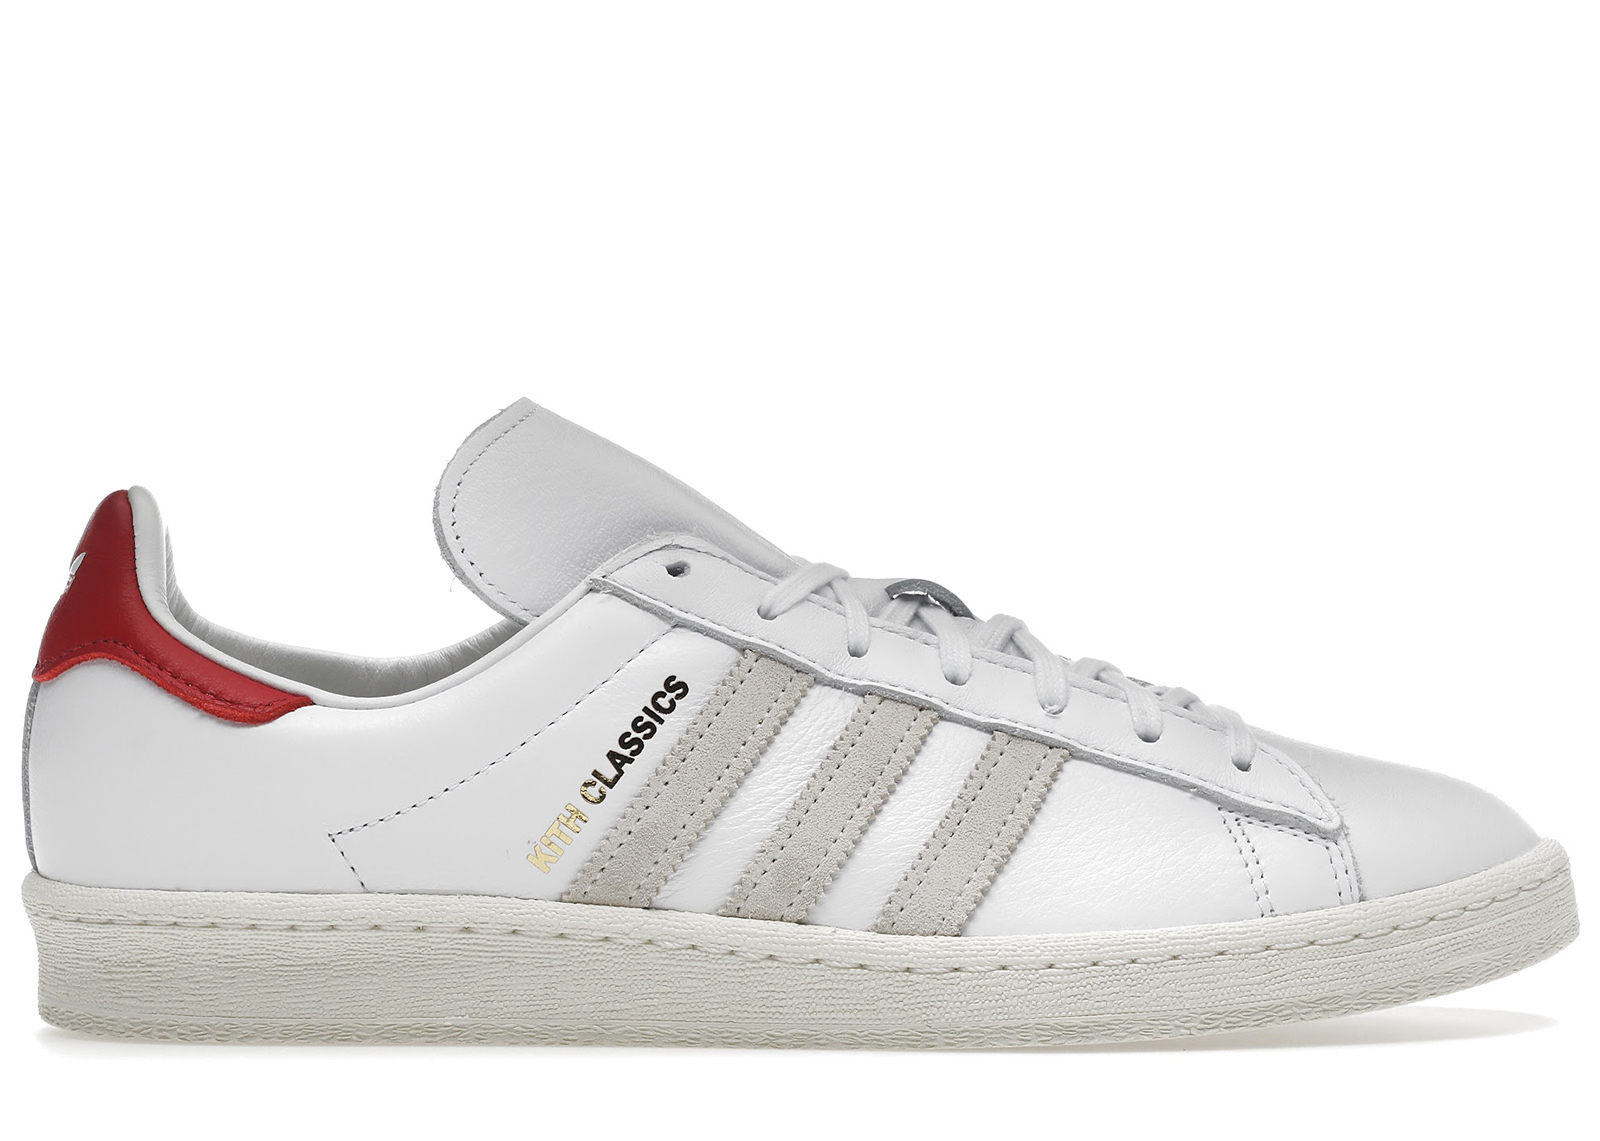 adidas Campus 80s Kith Classics White Red Men's - GY2542 - US